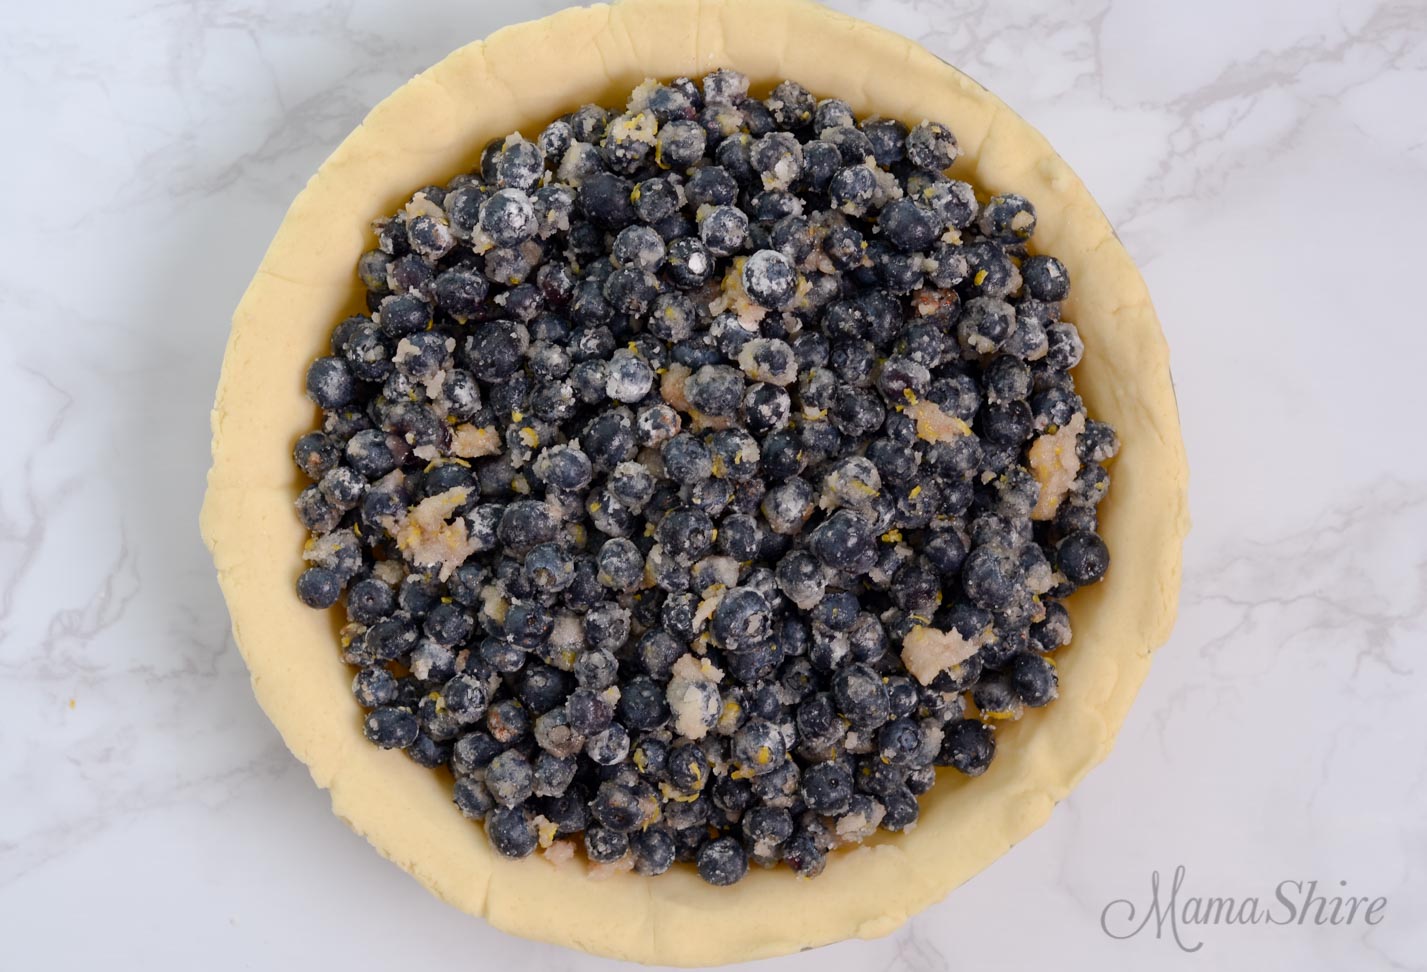 A pie crust with full of blueberry filling.